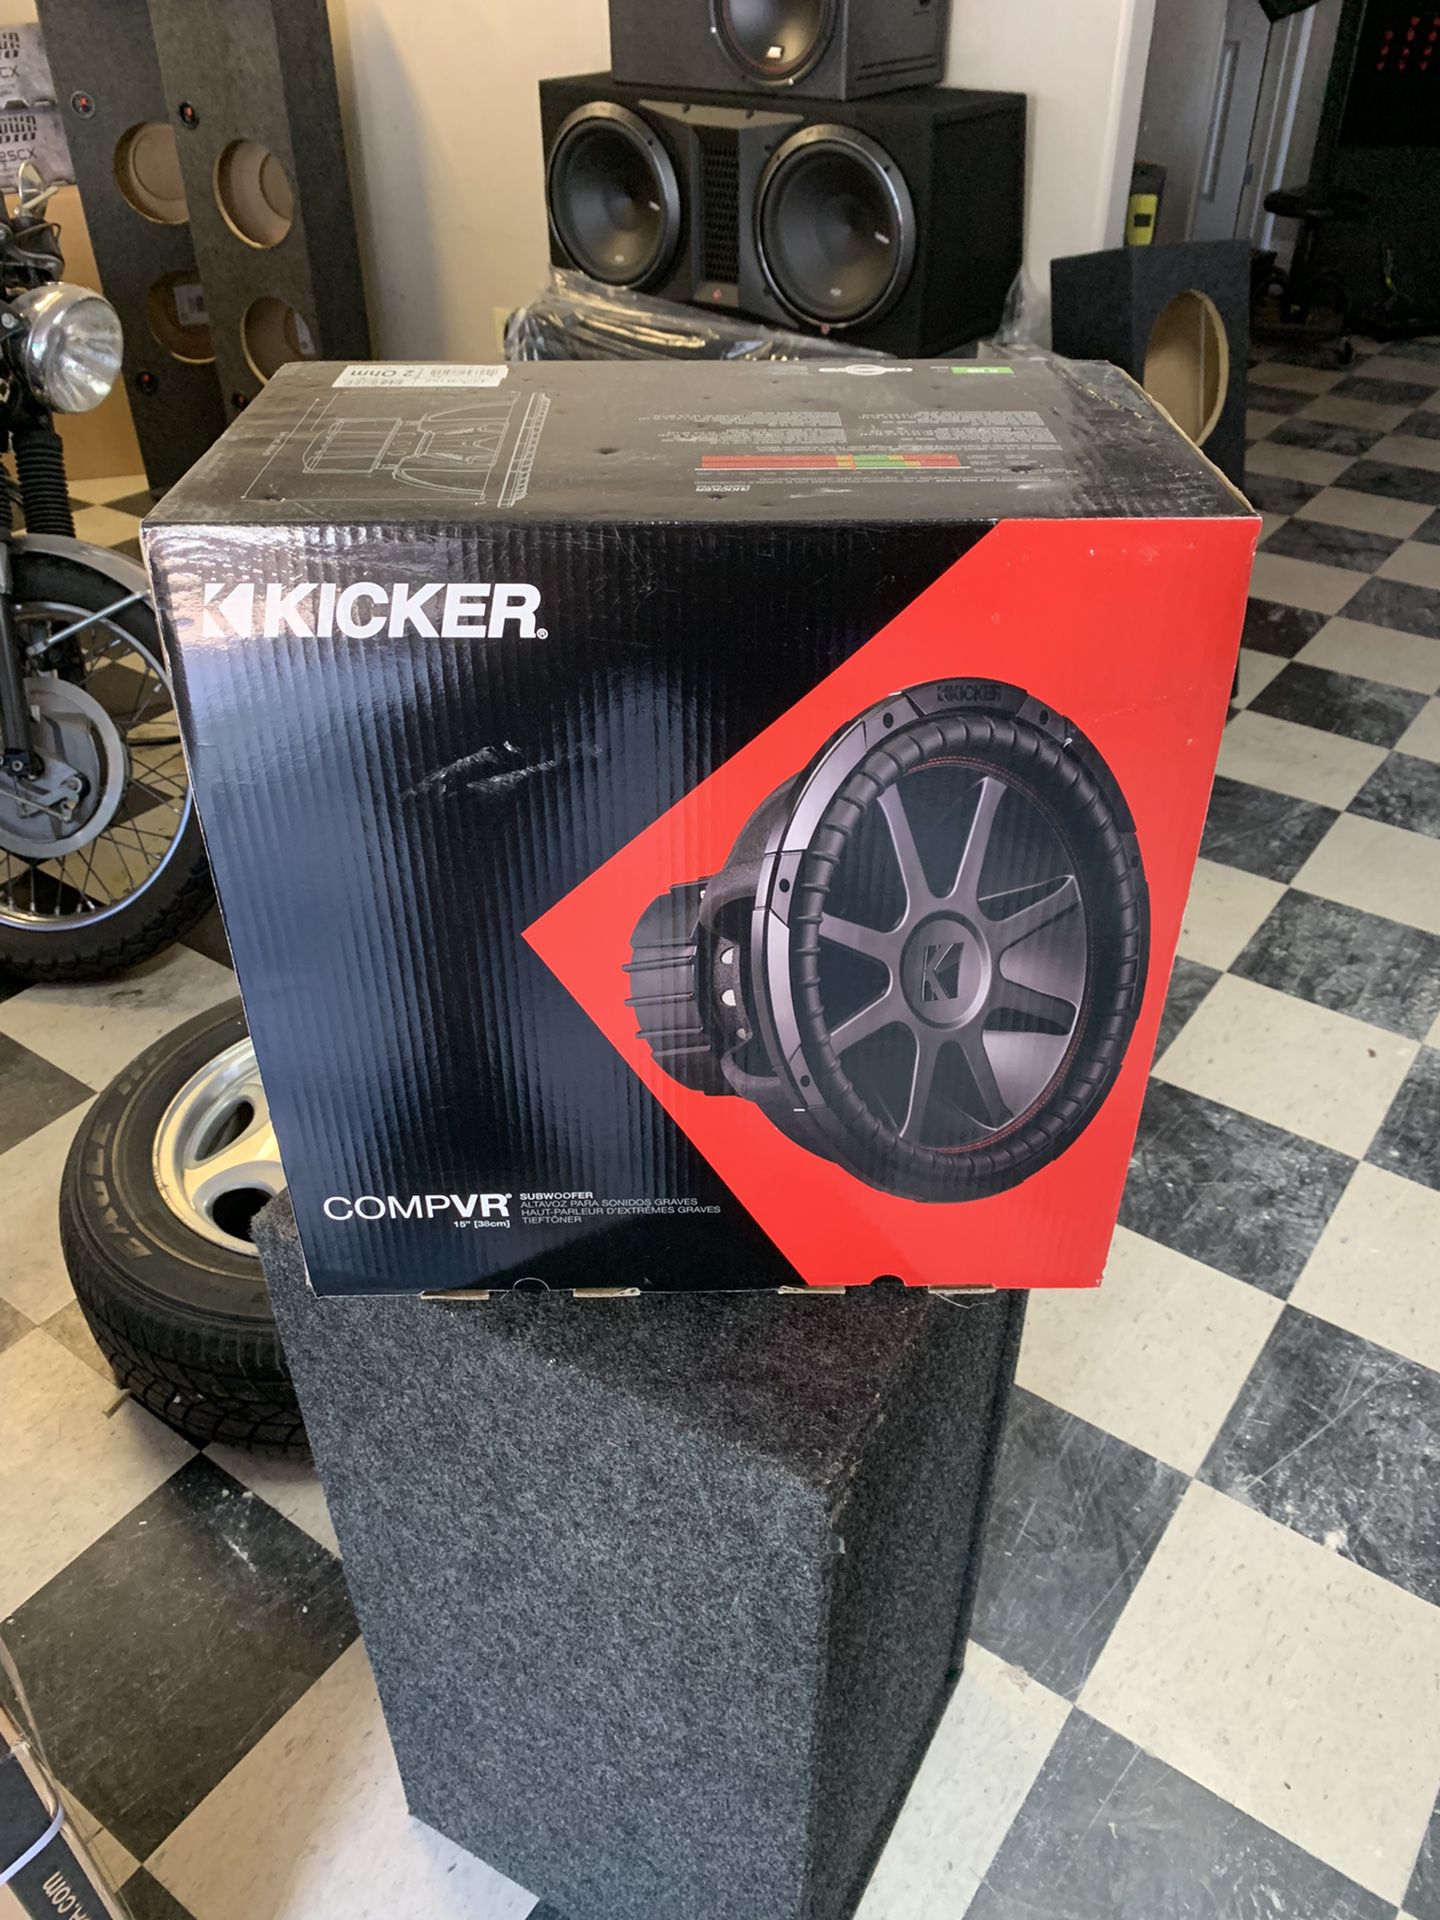 Kicker Car Audio Car Stereo Subwoofer. Comp Vr Series . Brand New 